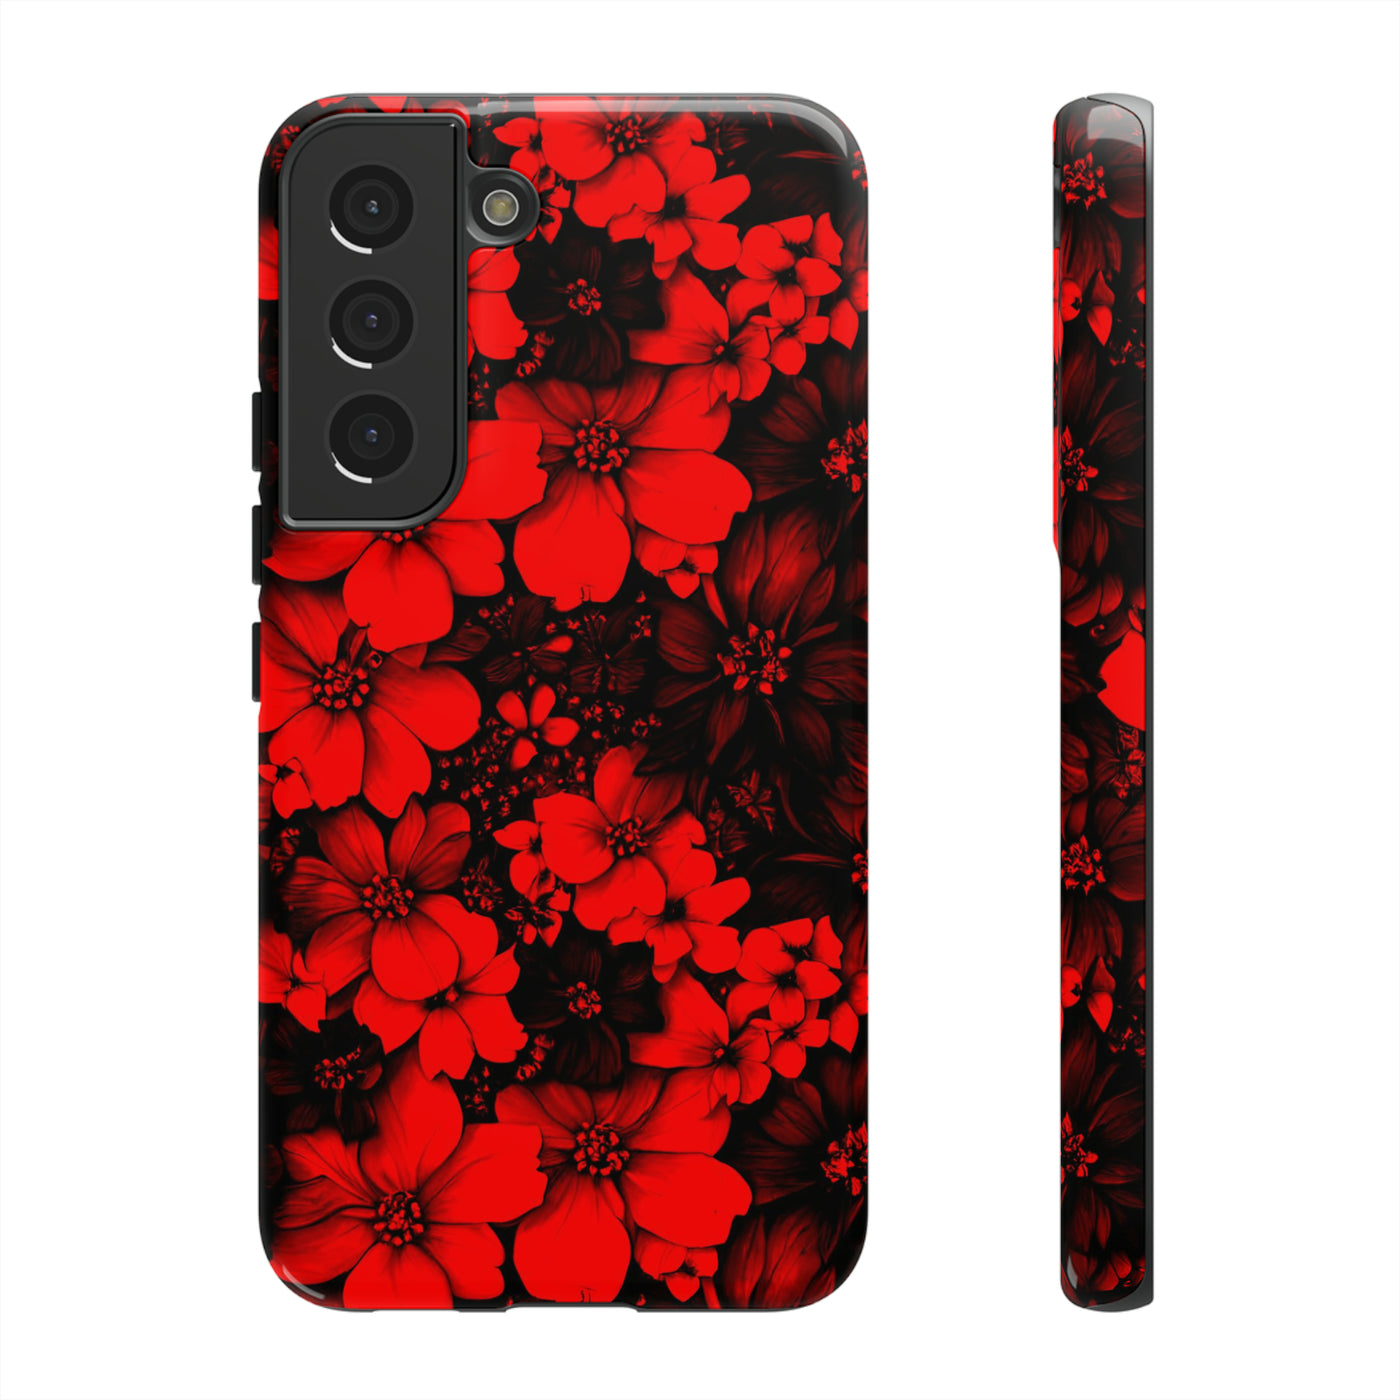 Cute Samsung Phone Case | Aesthetic Samsung Phone Case | Galaxy S23, S22, S21, S20 | Red Black Flowers, Protective Phone Case